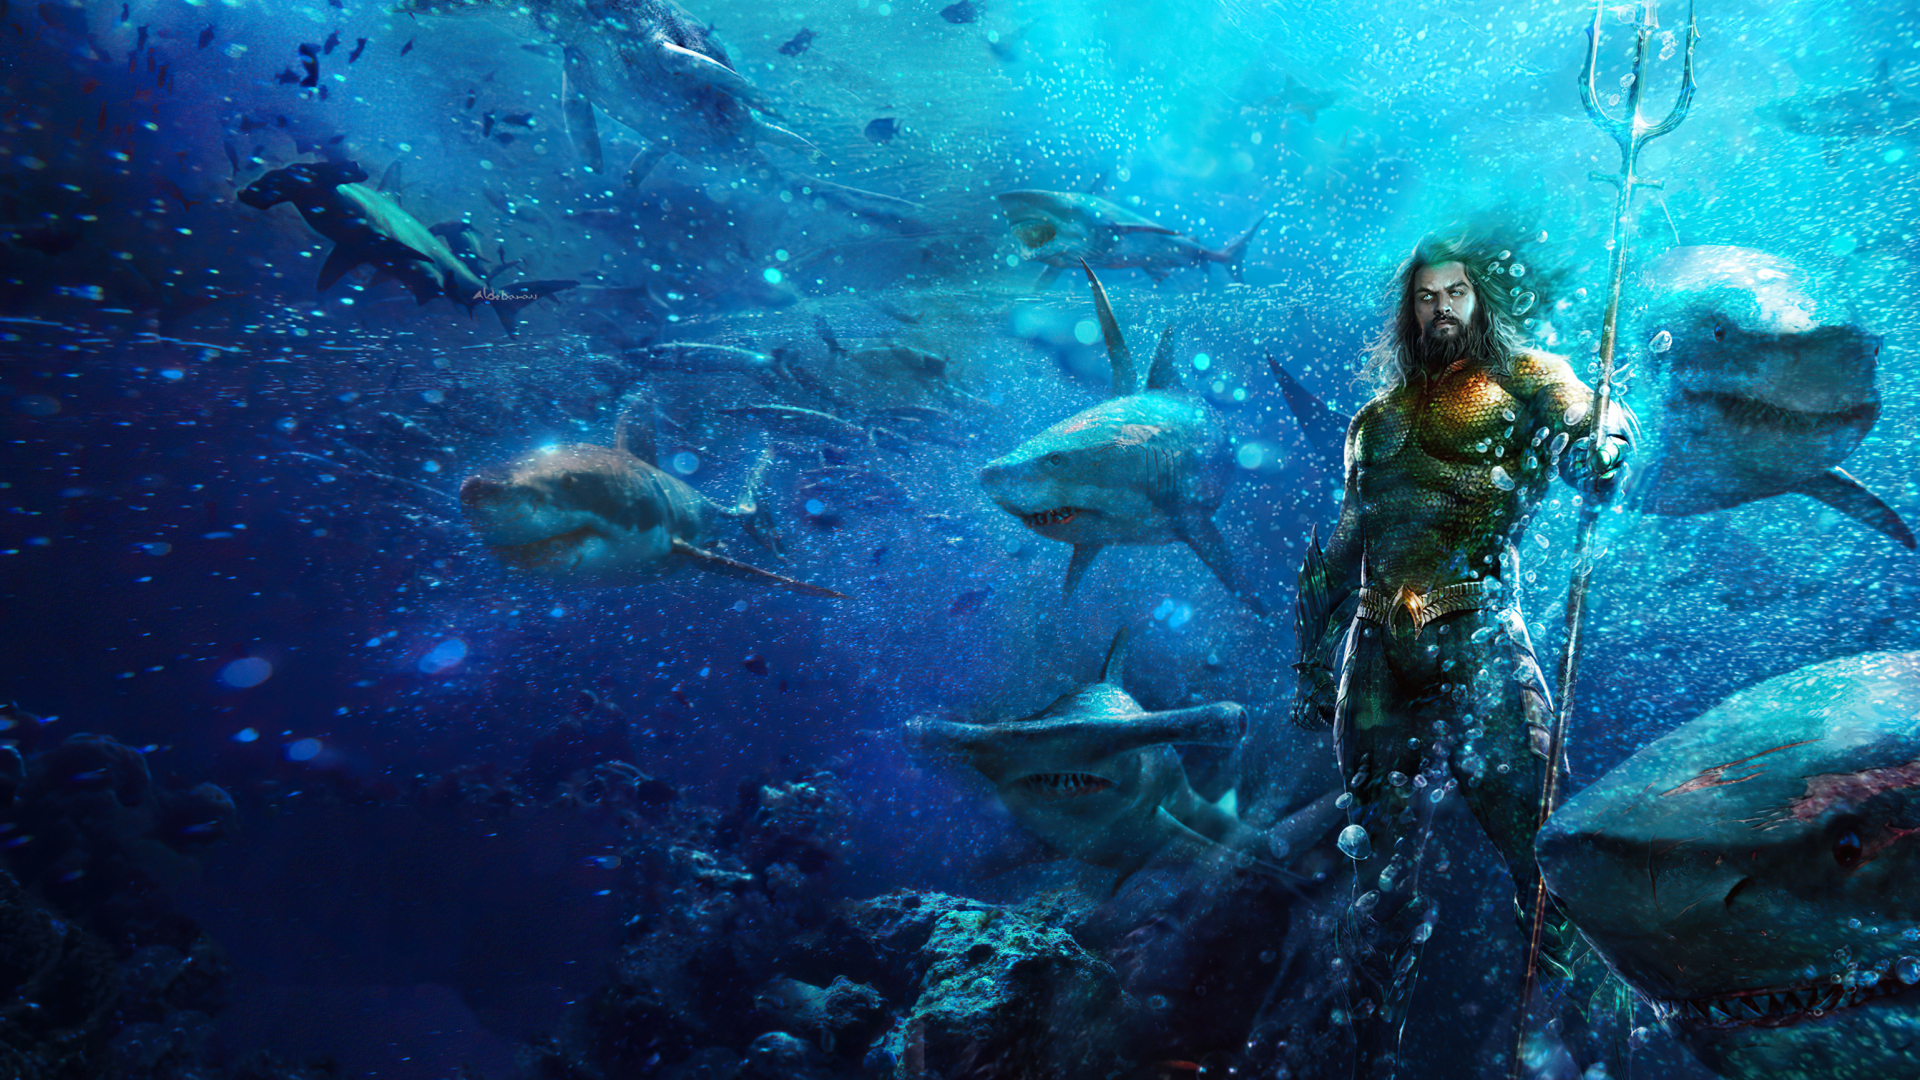 download the new for android Aquaman